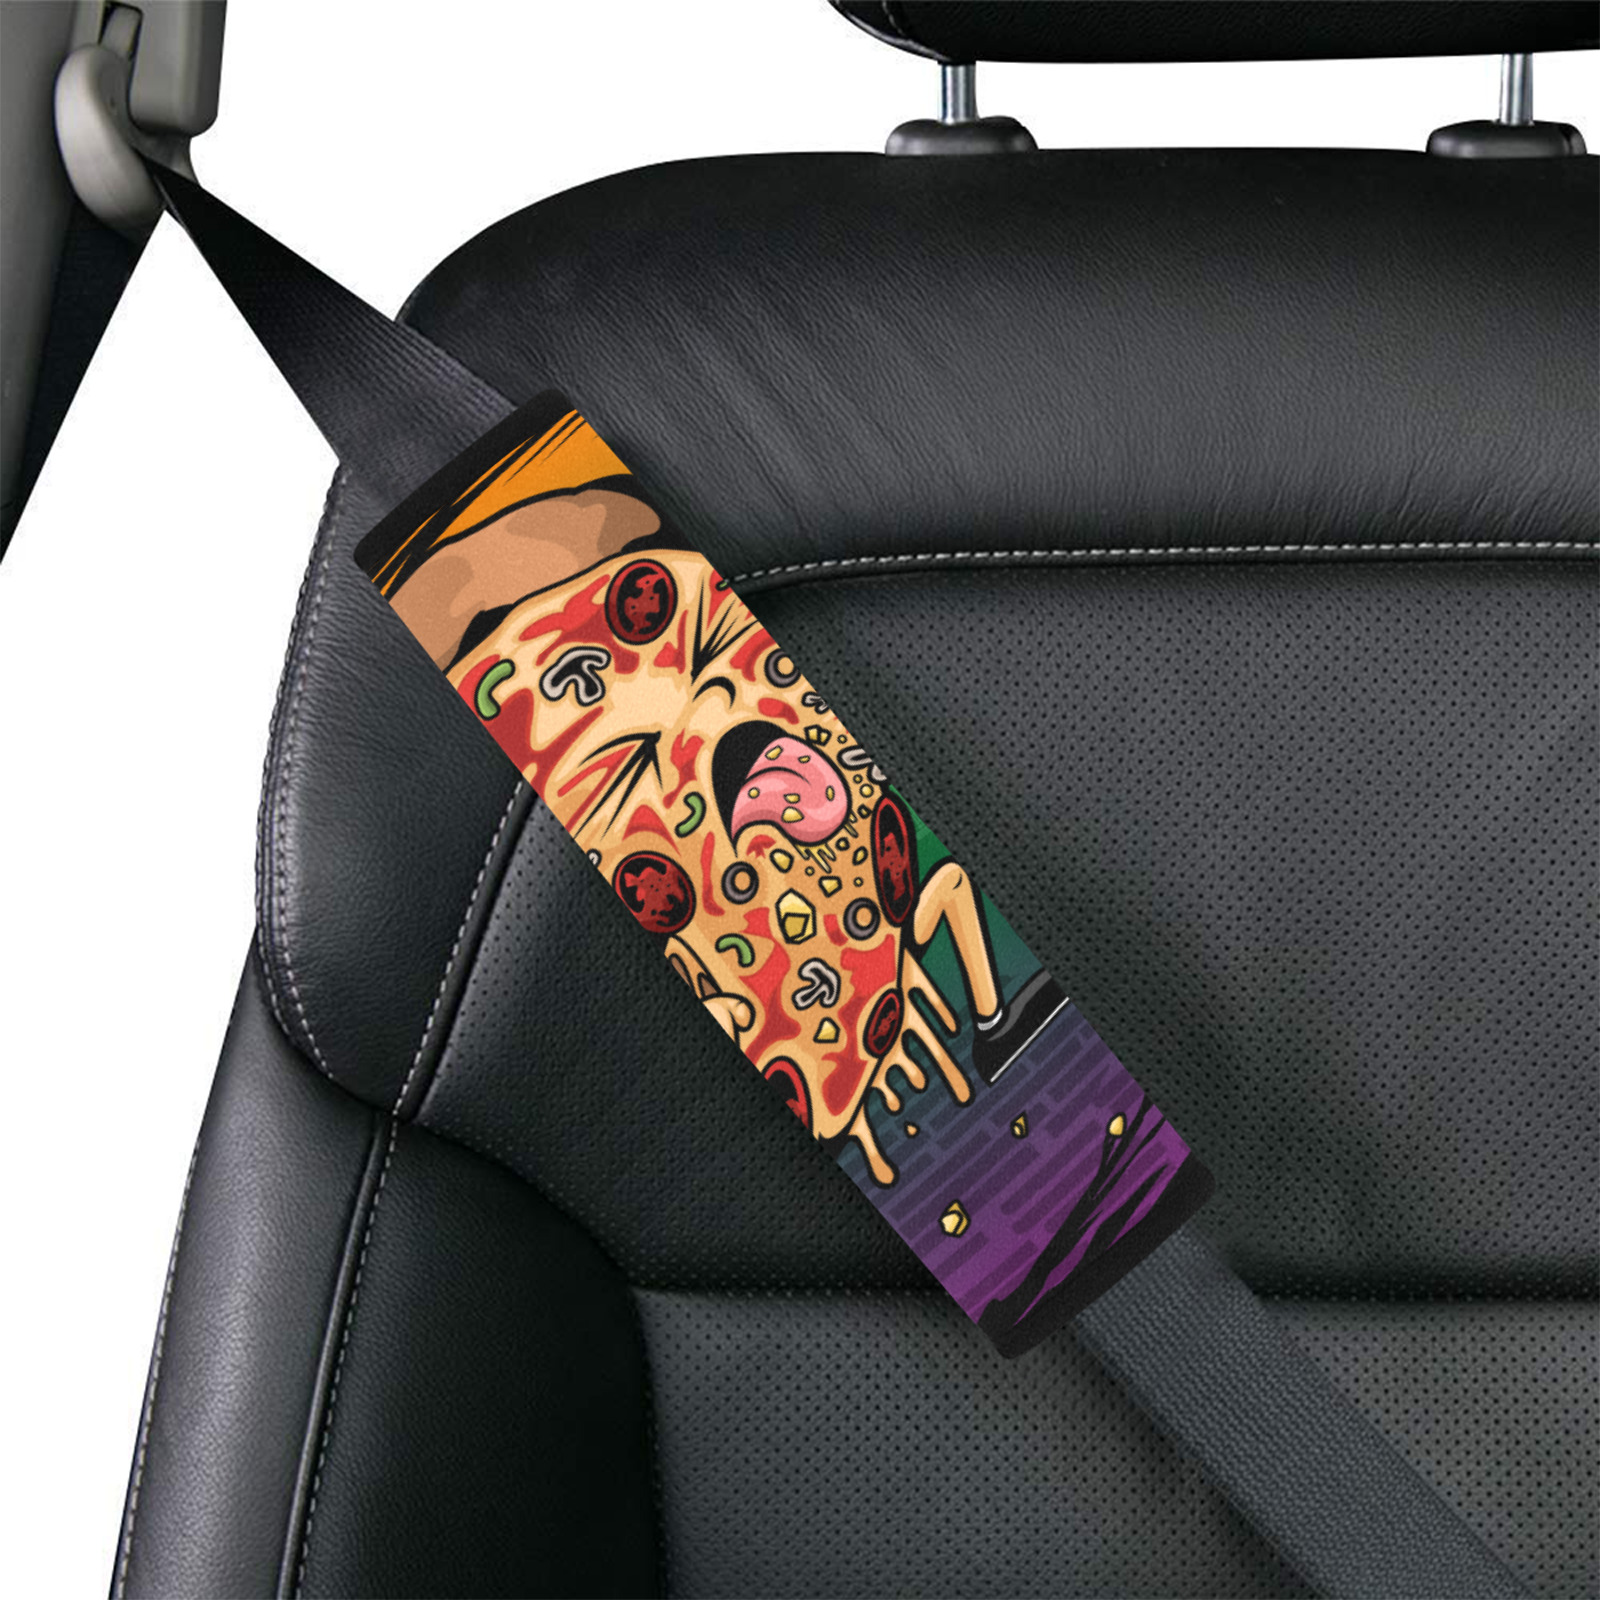 No Pineapple Car Seat Belt Cover 7''x10''